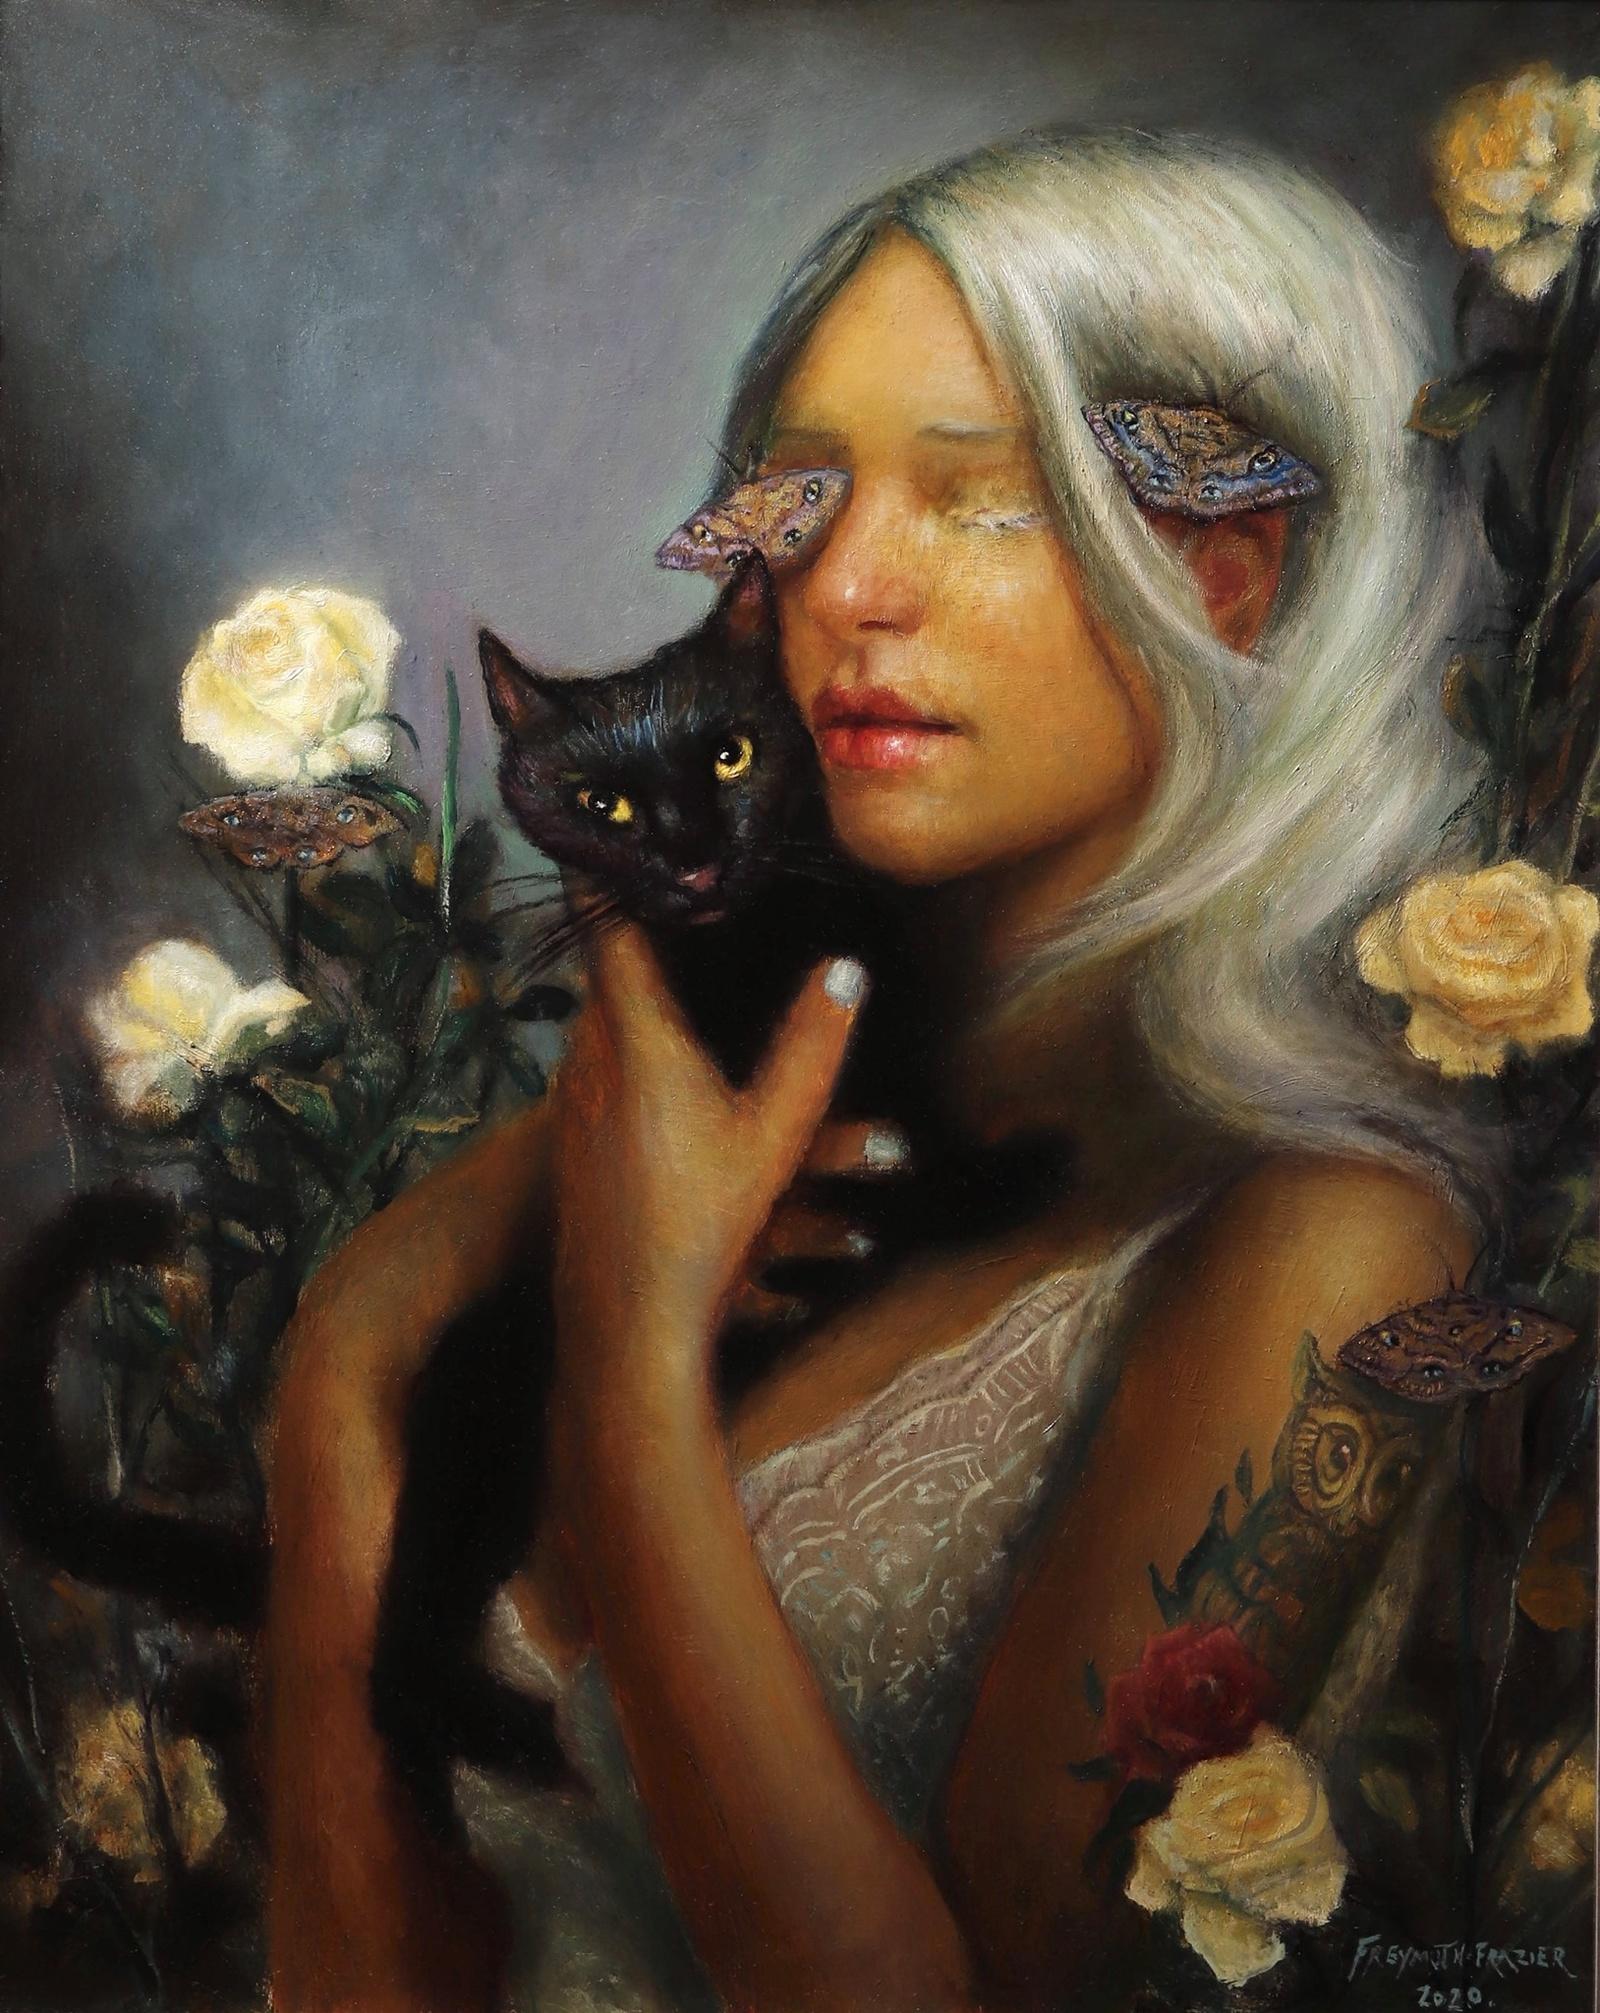 Rose Freymuth-Frazier Figurative Painting - Night Vision - Platinum Blond Woman, Black Cat, Roses, Butterflies, Oil Painting